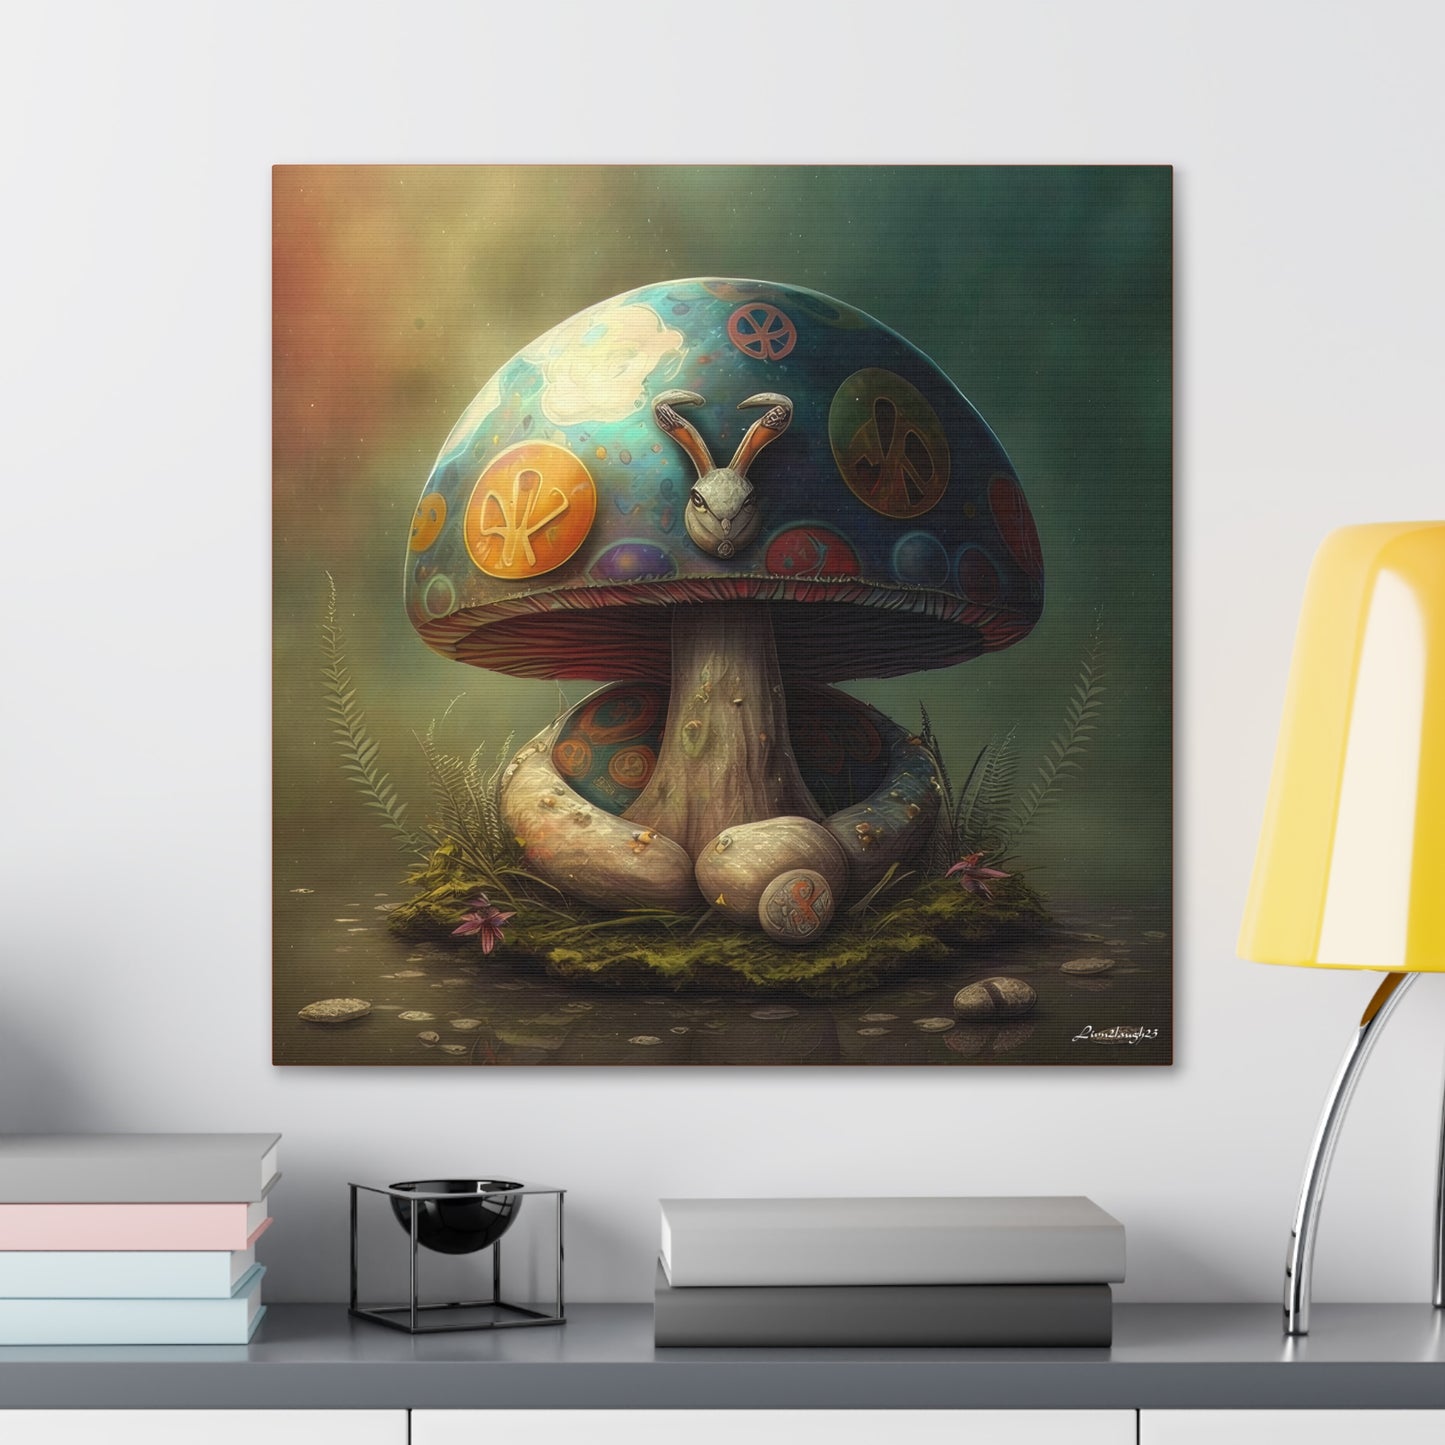 Gothic Style Blue Mushroom With Animal Style Canvas Gallery Wraps